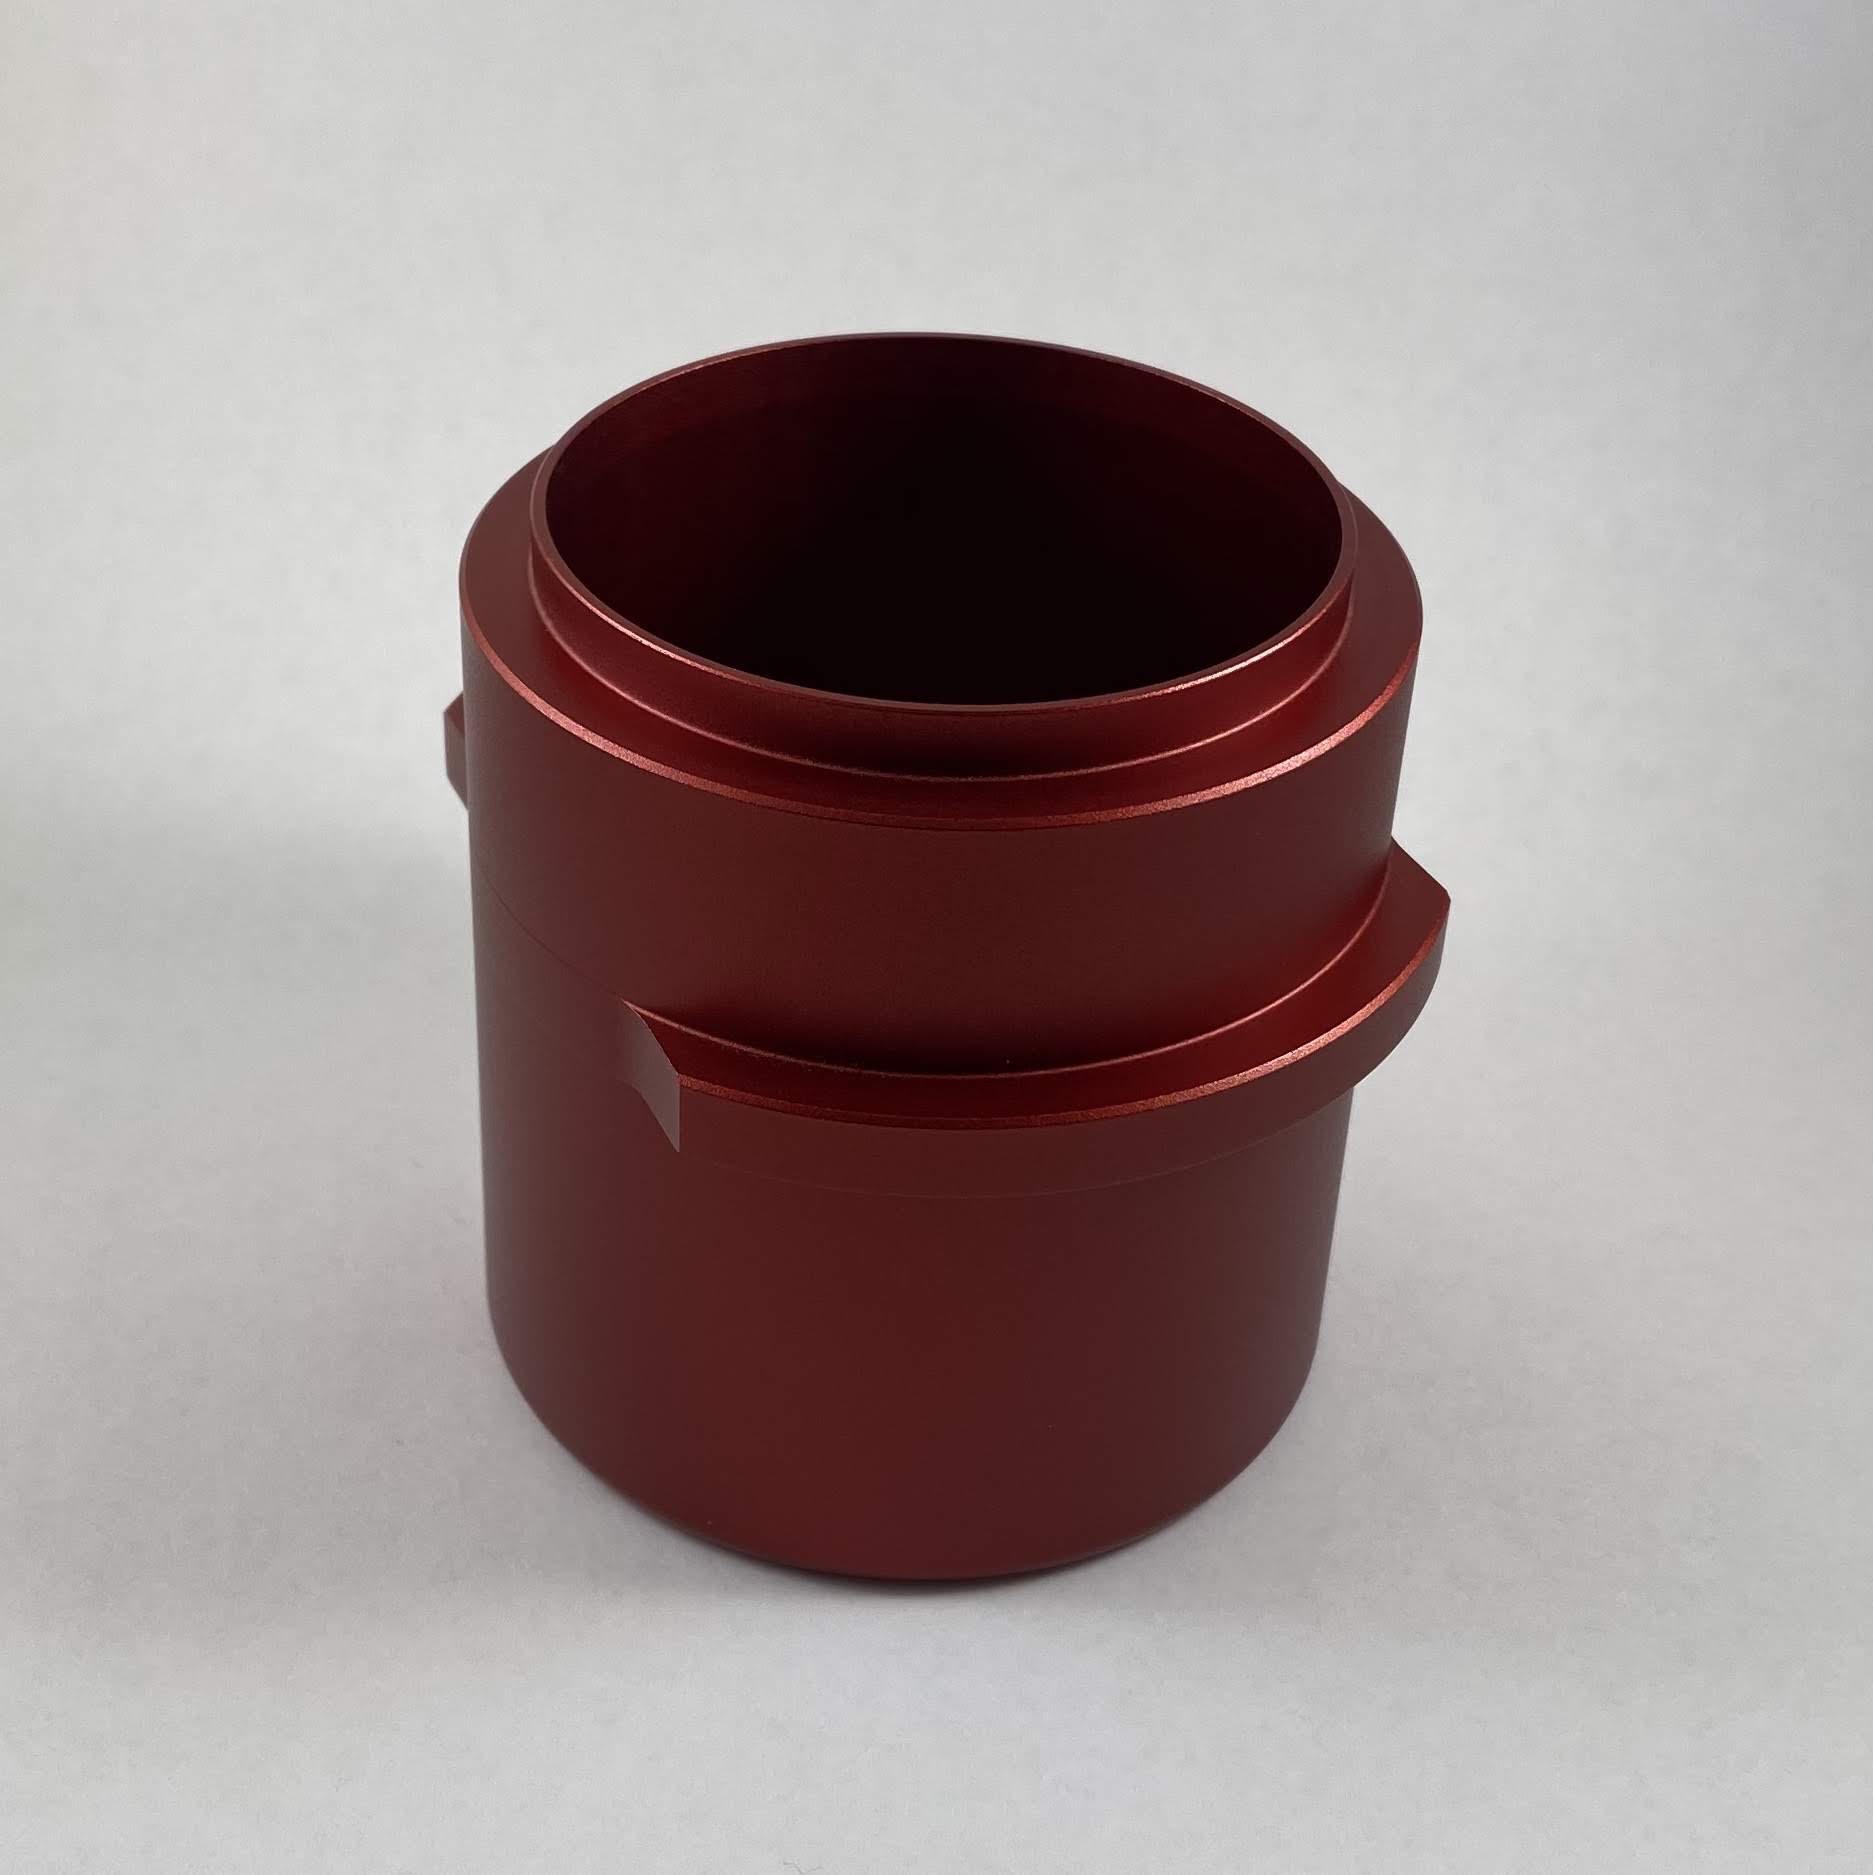 58mm Catch Cup